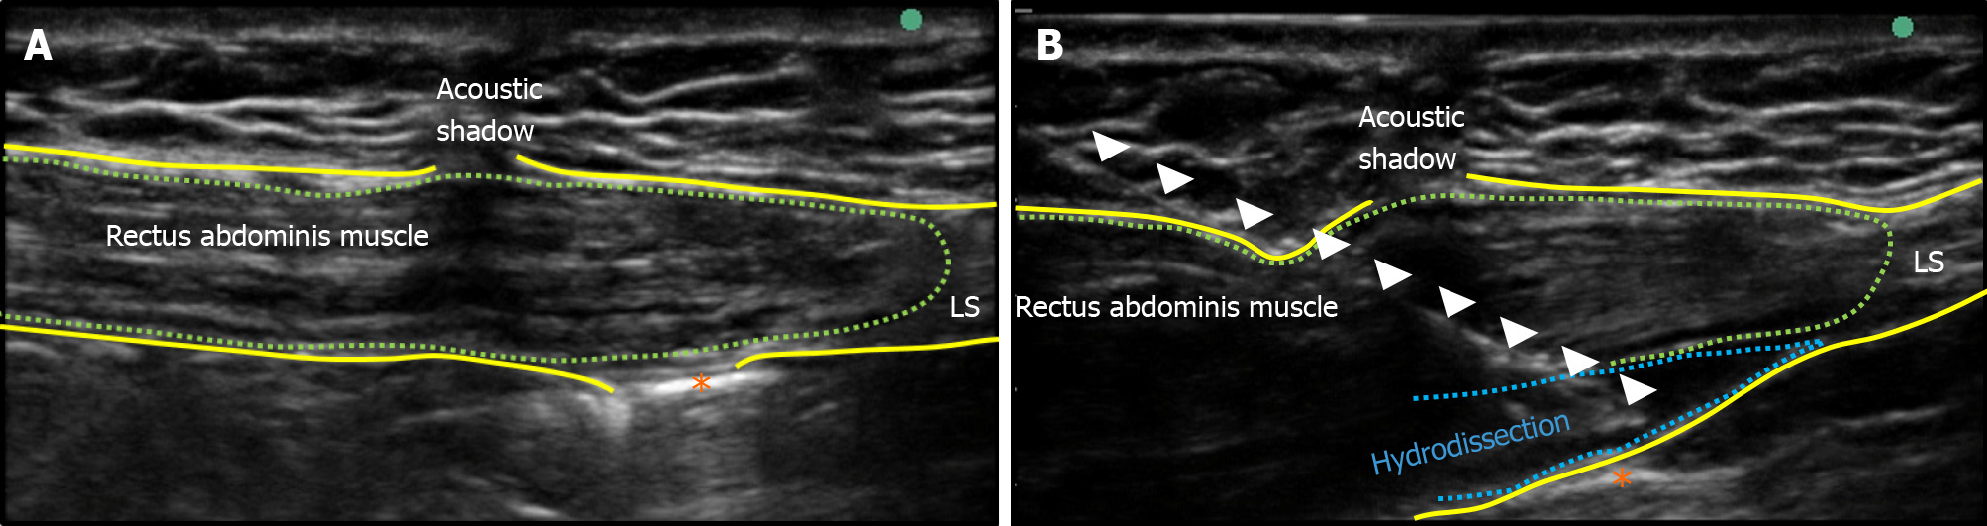 Ultrasound Guided Rectus Sheath Block For Anterior Cutaneous Nerve Entrapment Syndrome After